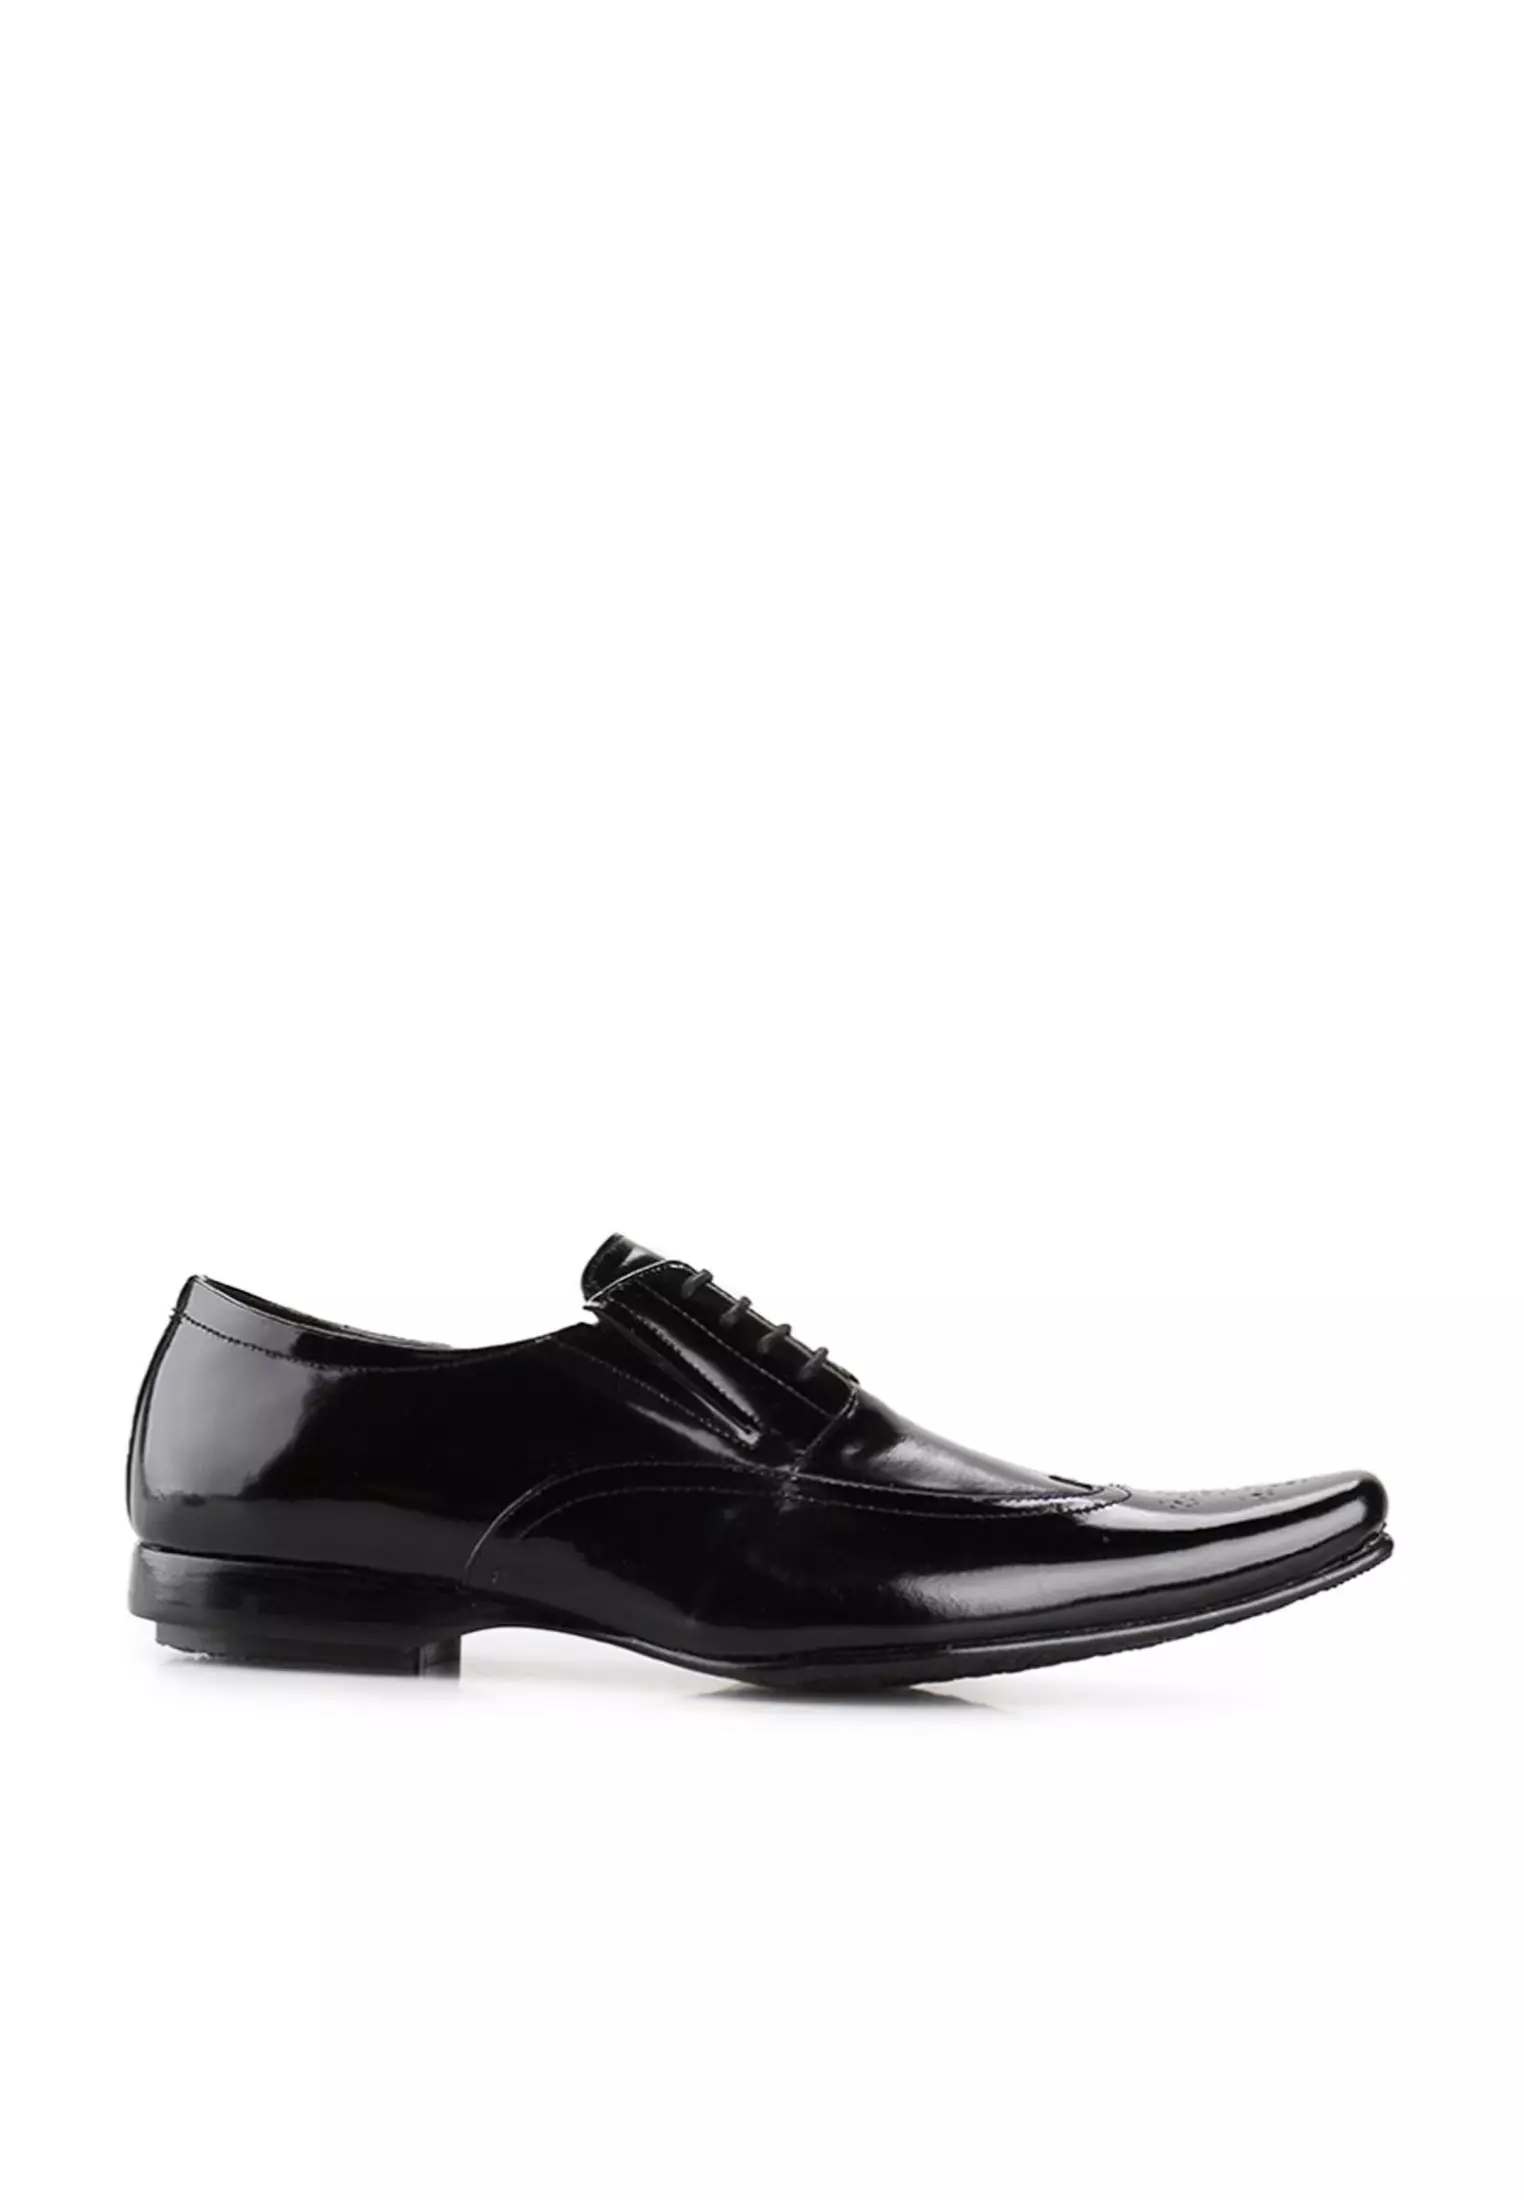 Jual Marelli Anthony Men Formal Shoes Lace Up Loafers Cow Leather ...